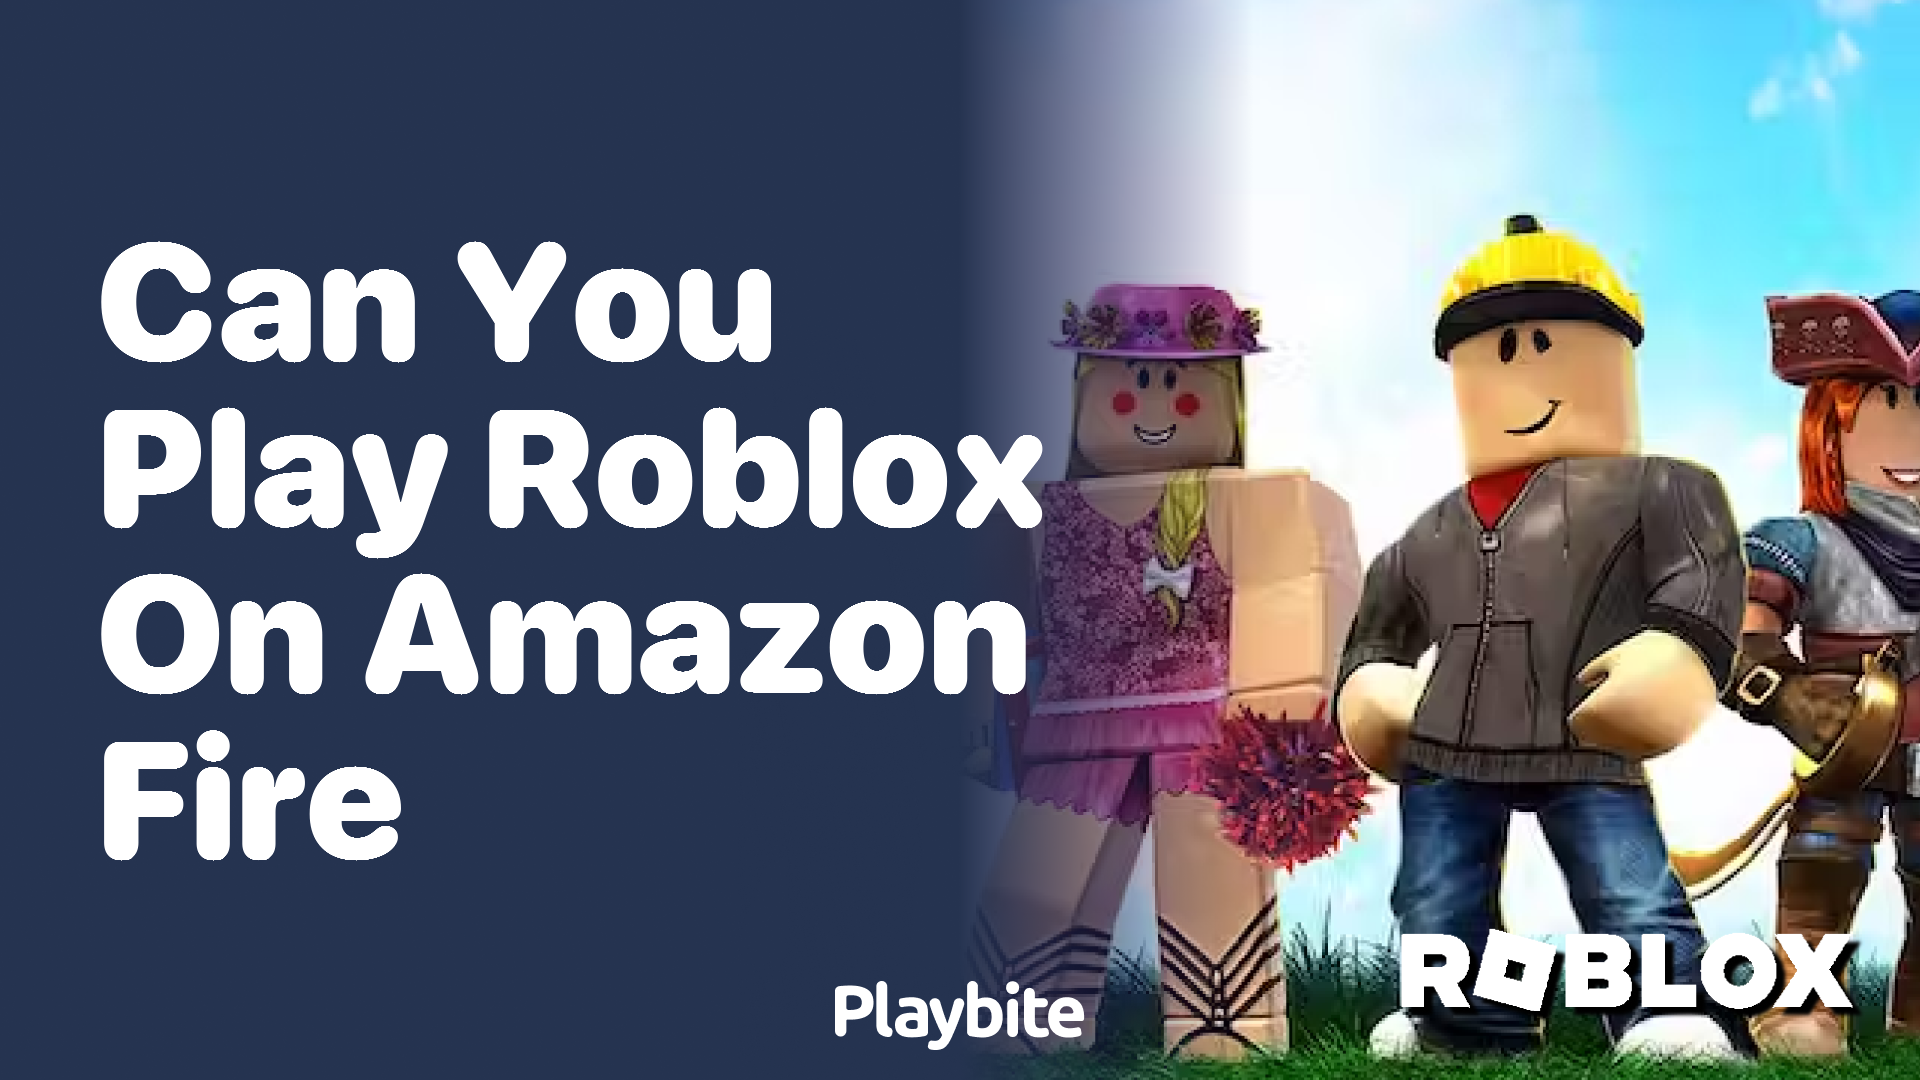 Can You Play Roblox on Amazon Fire? Find Out Here!